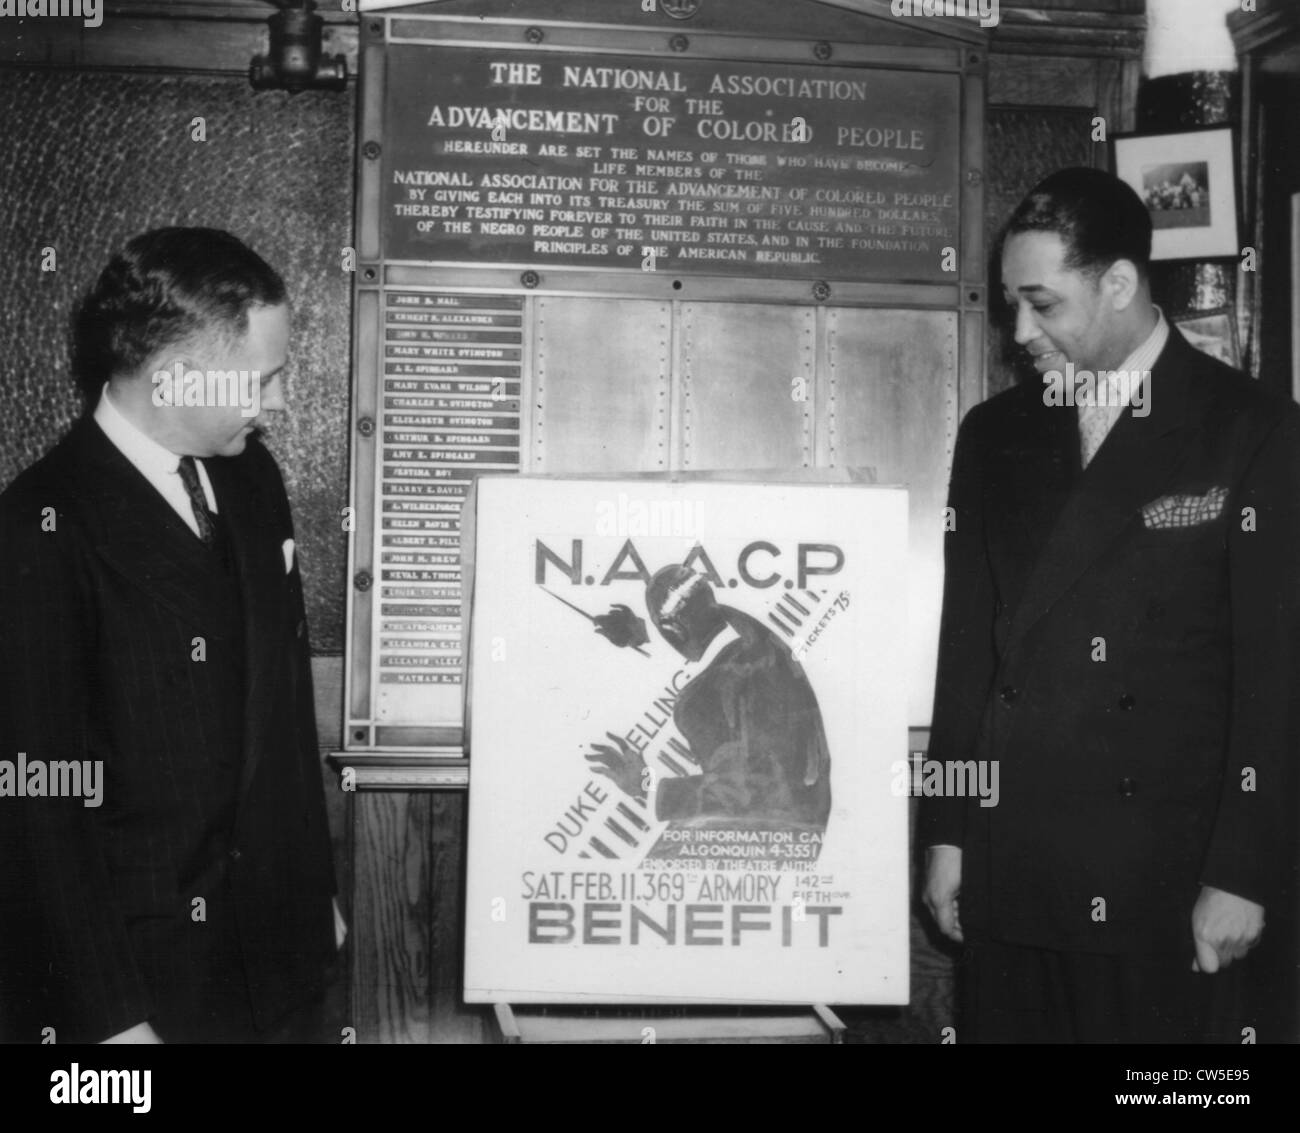 NAACP (National Association for the Advancement of Colored People) Stockfoto